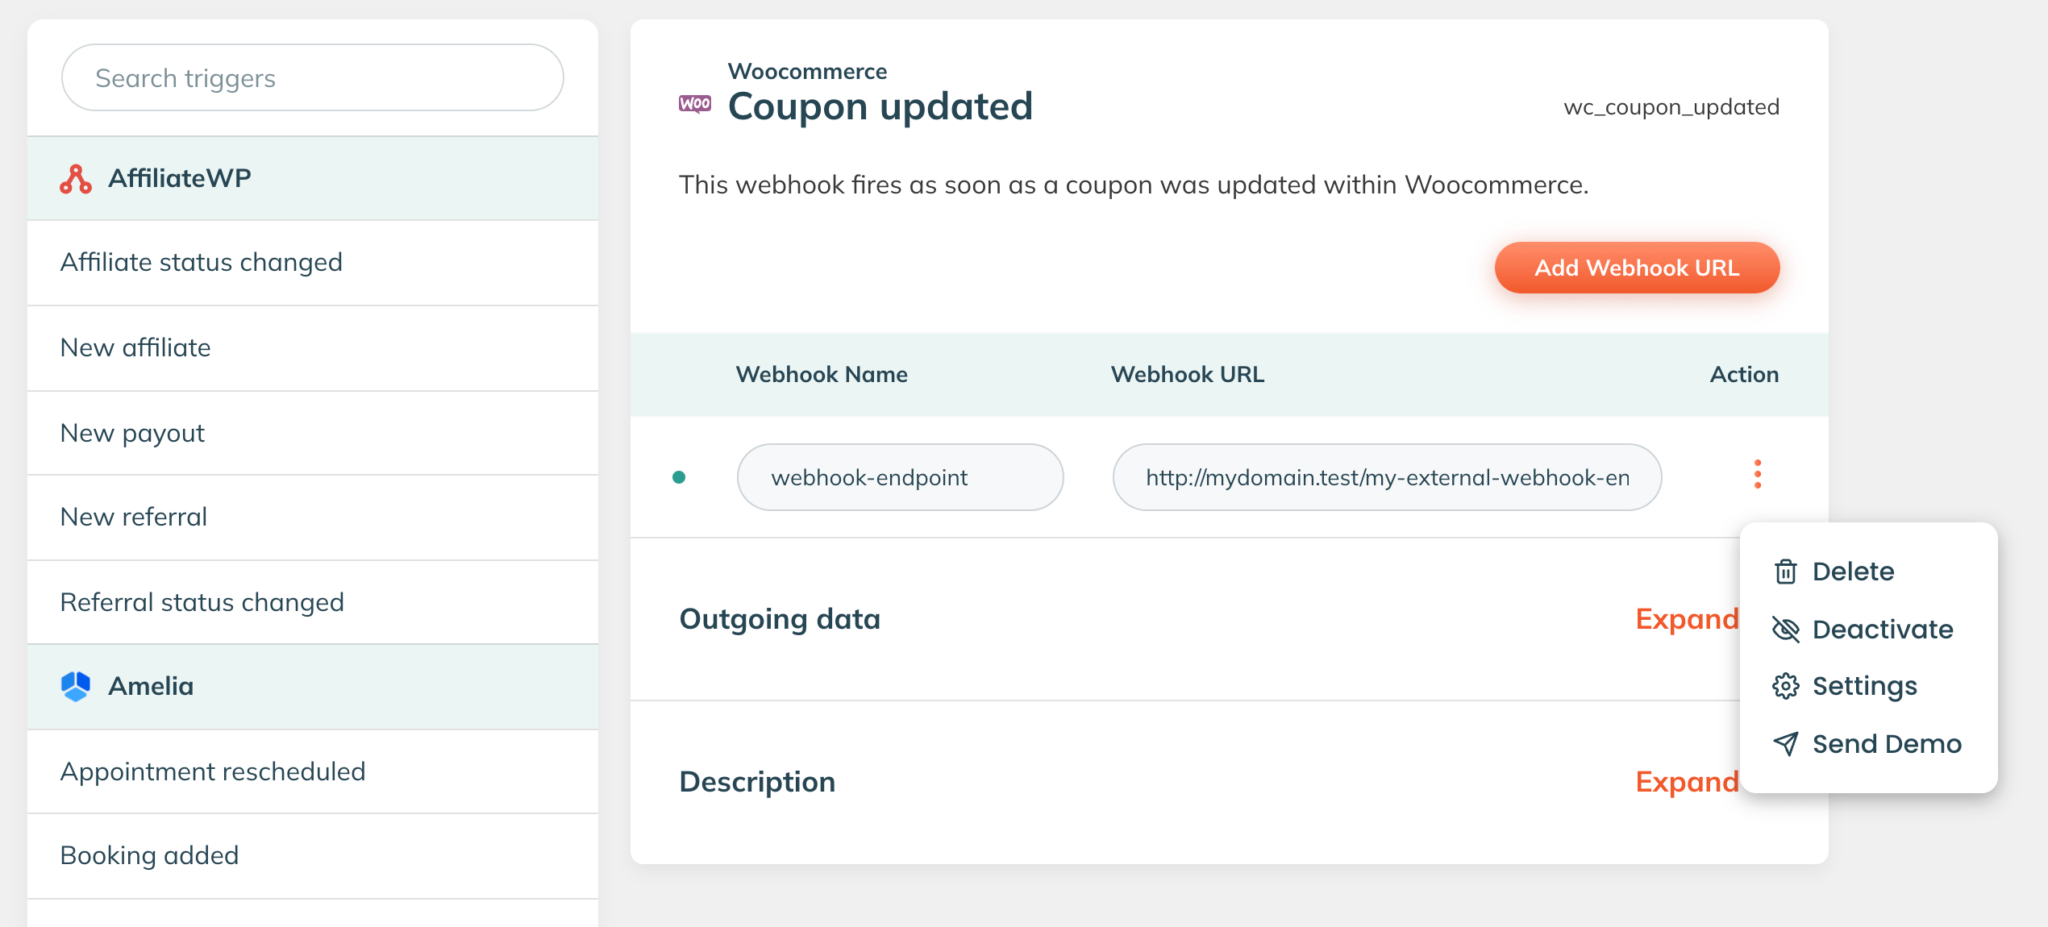 The WP Webhooks screen of the Contact tag removed trigger